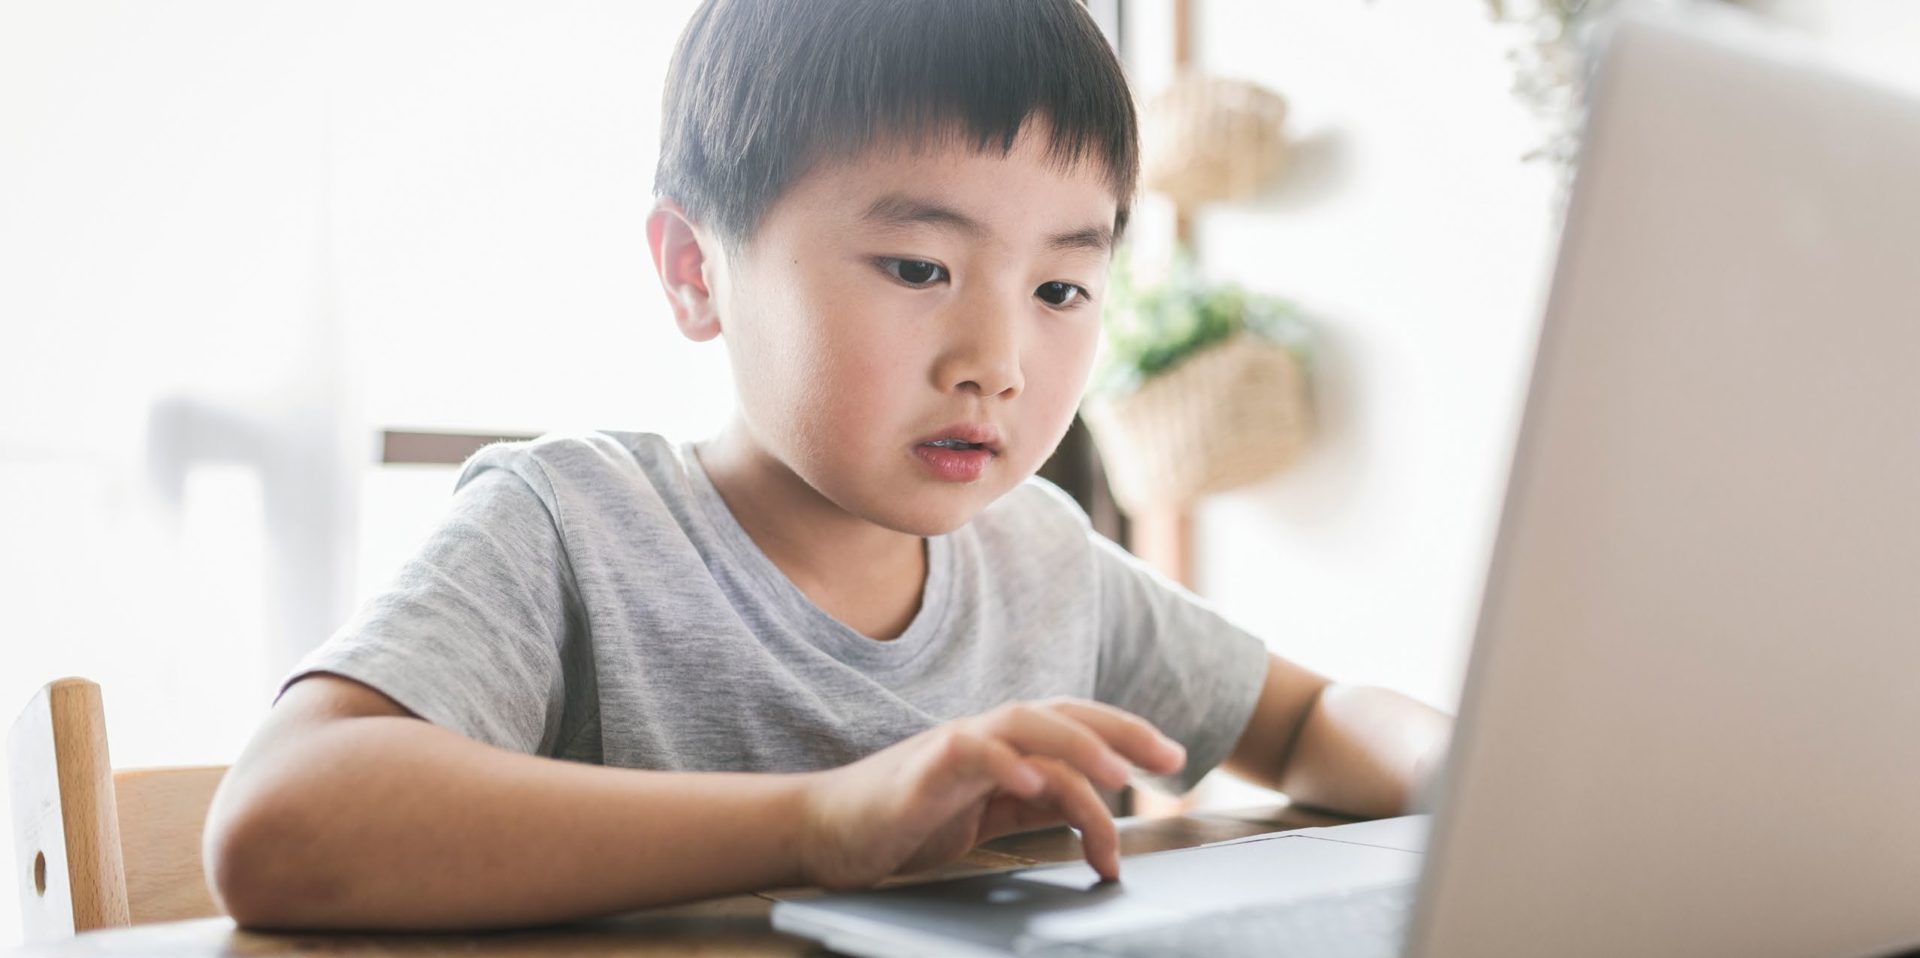 Little boy pressing a key on a laptop computer in front of him